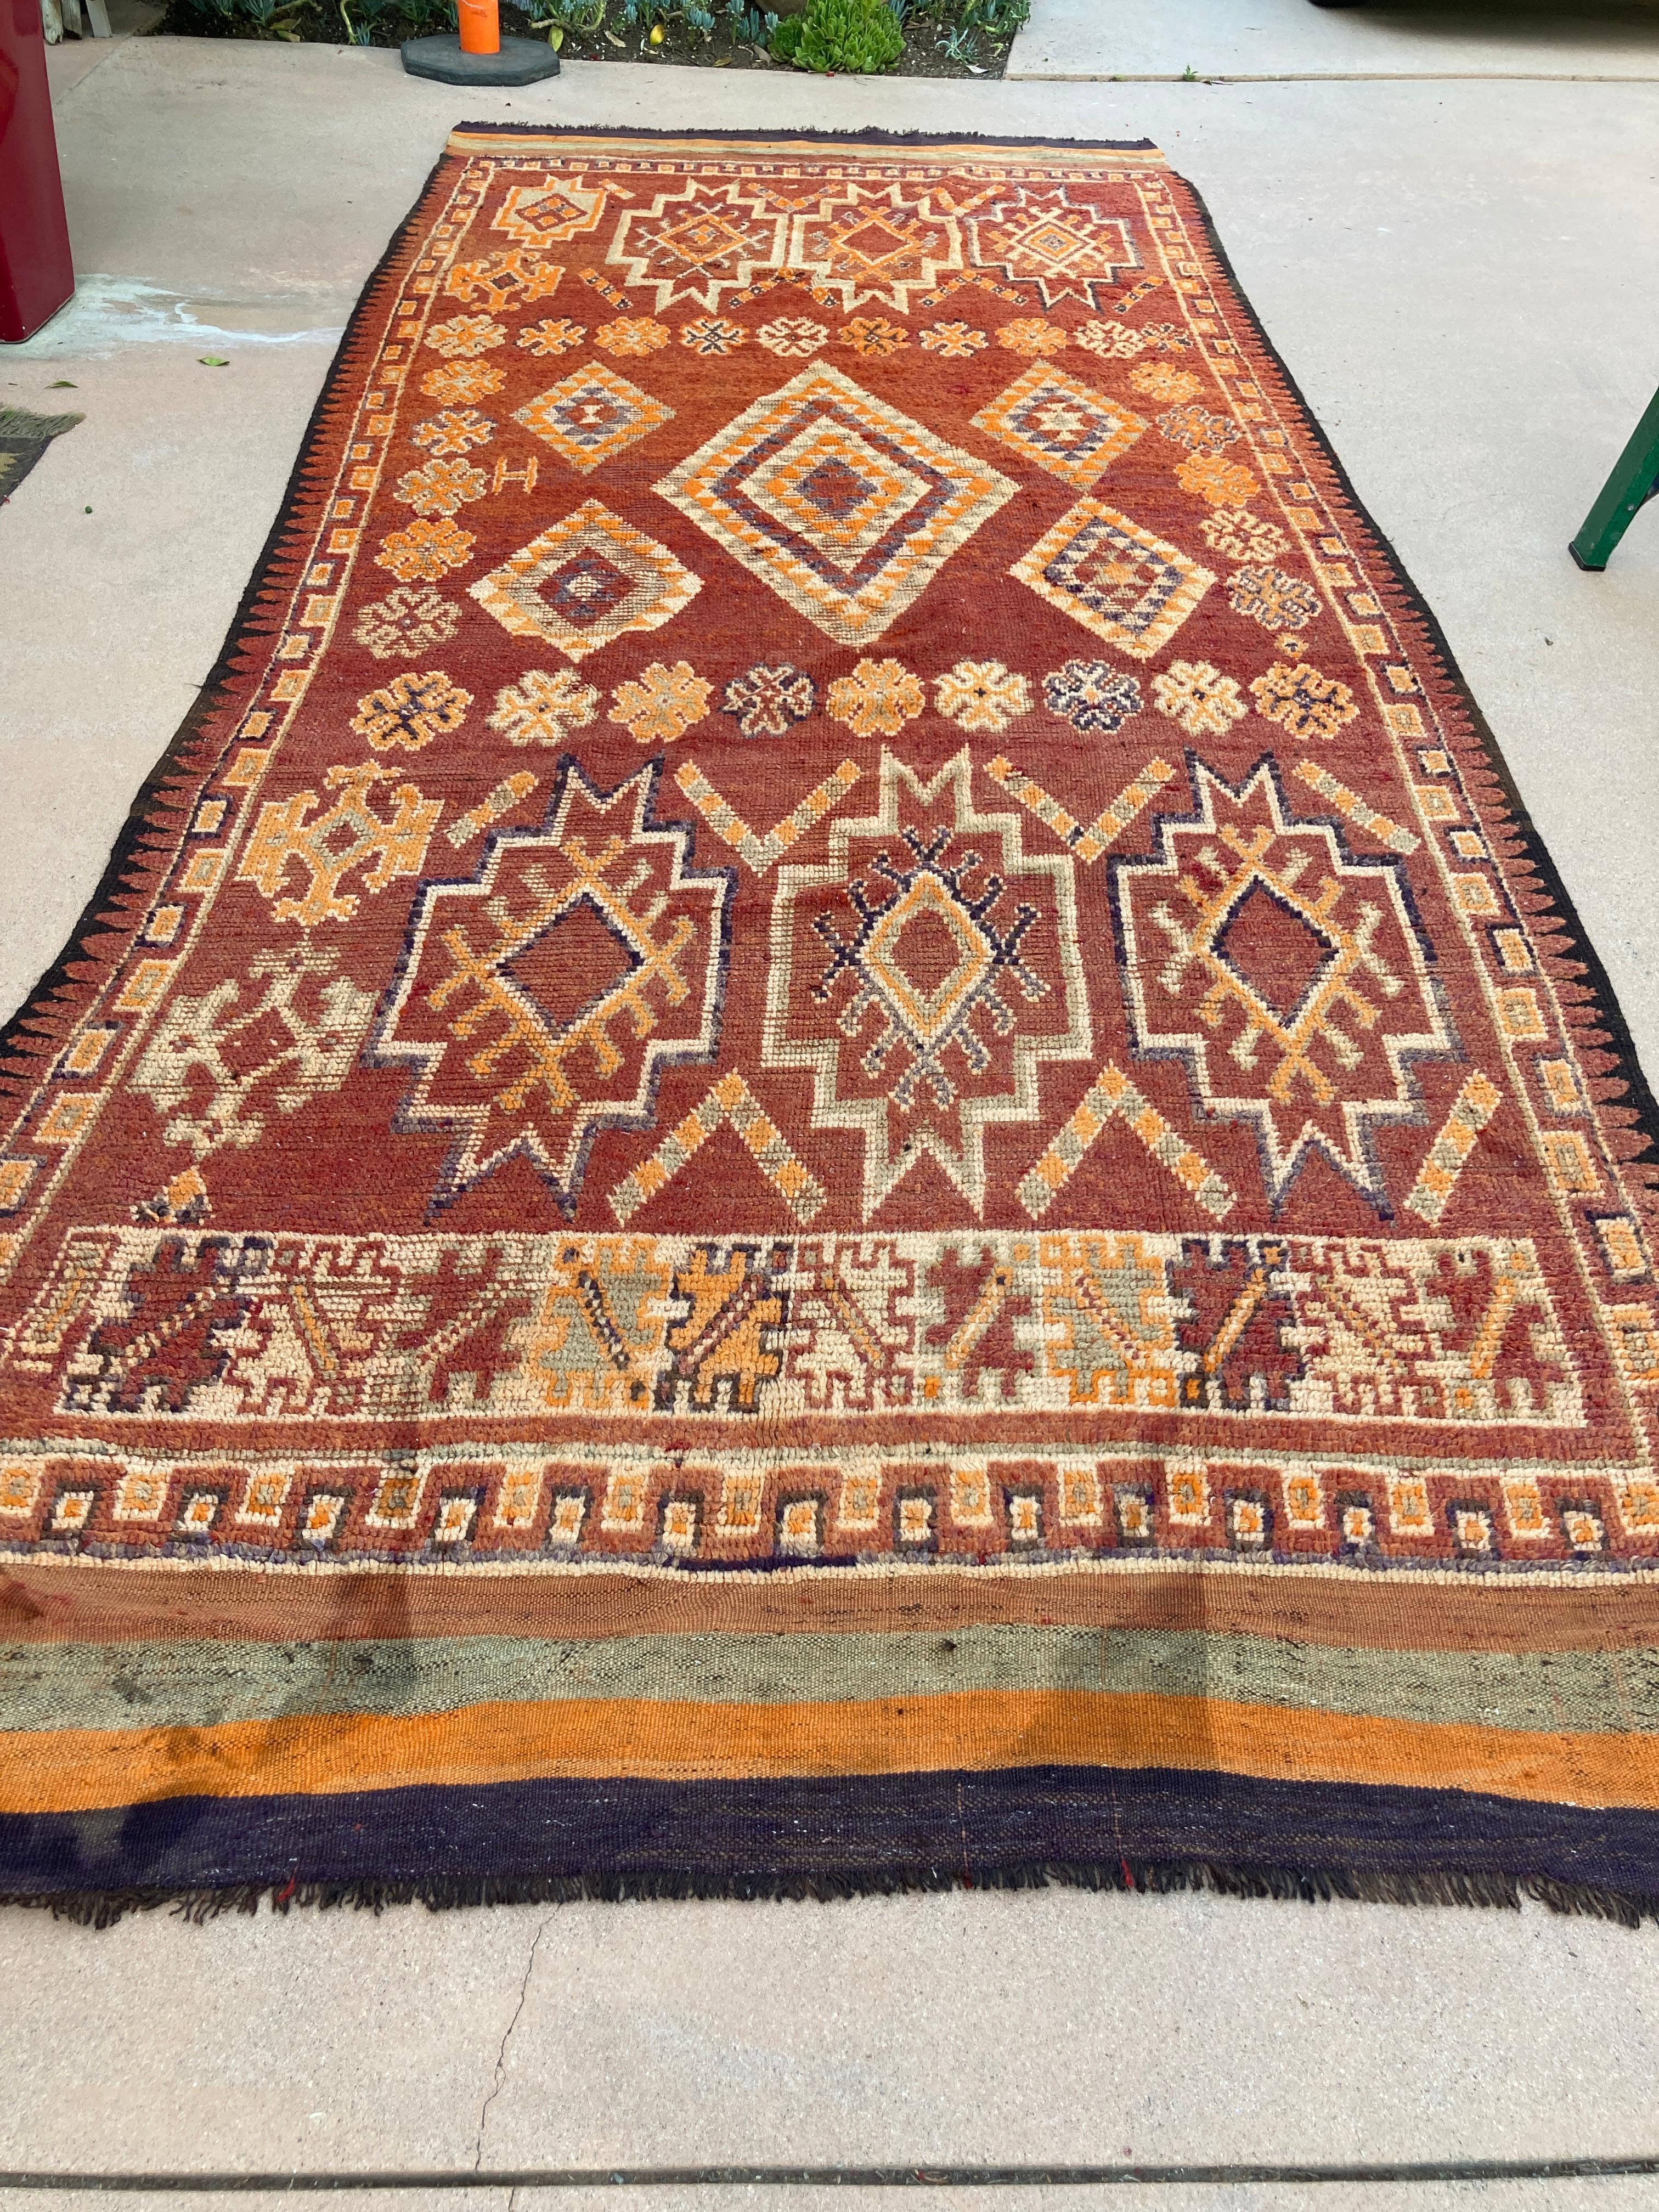 1960s authentic Midcentury Moroccan Area Rug with Tribal Geometric Design.This circa 1960 vintage Moroccan rug features a bd design of diamond medallions flanked by geometric abstractions .The ethnic tribal Moroccan Berber area rug features a series